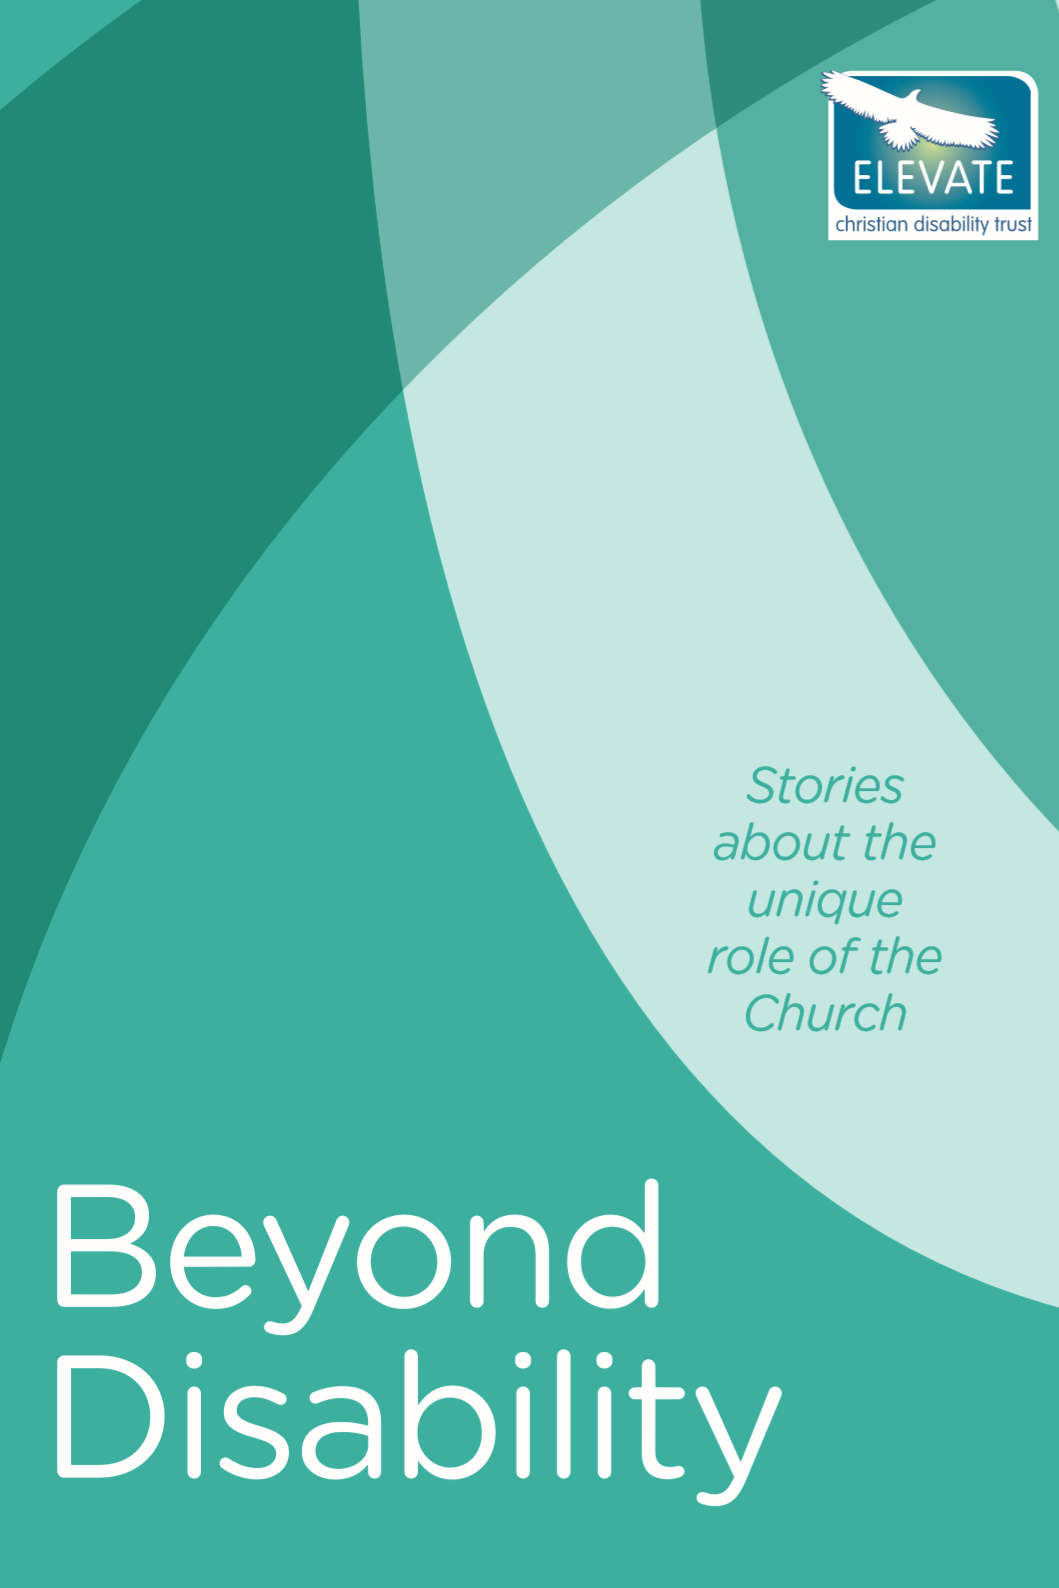 Beyond Disability Cover Image, green curved graphic design with Elevate logo in top right corner